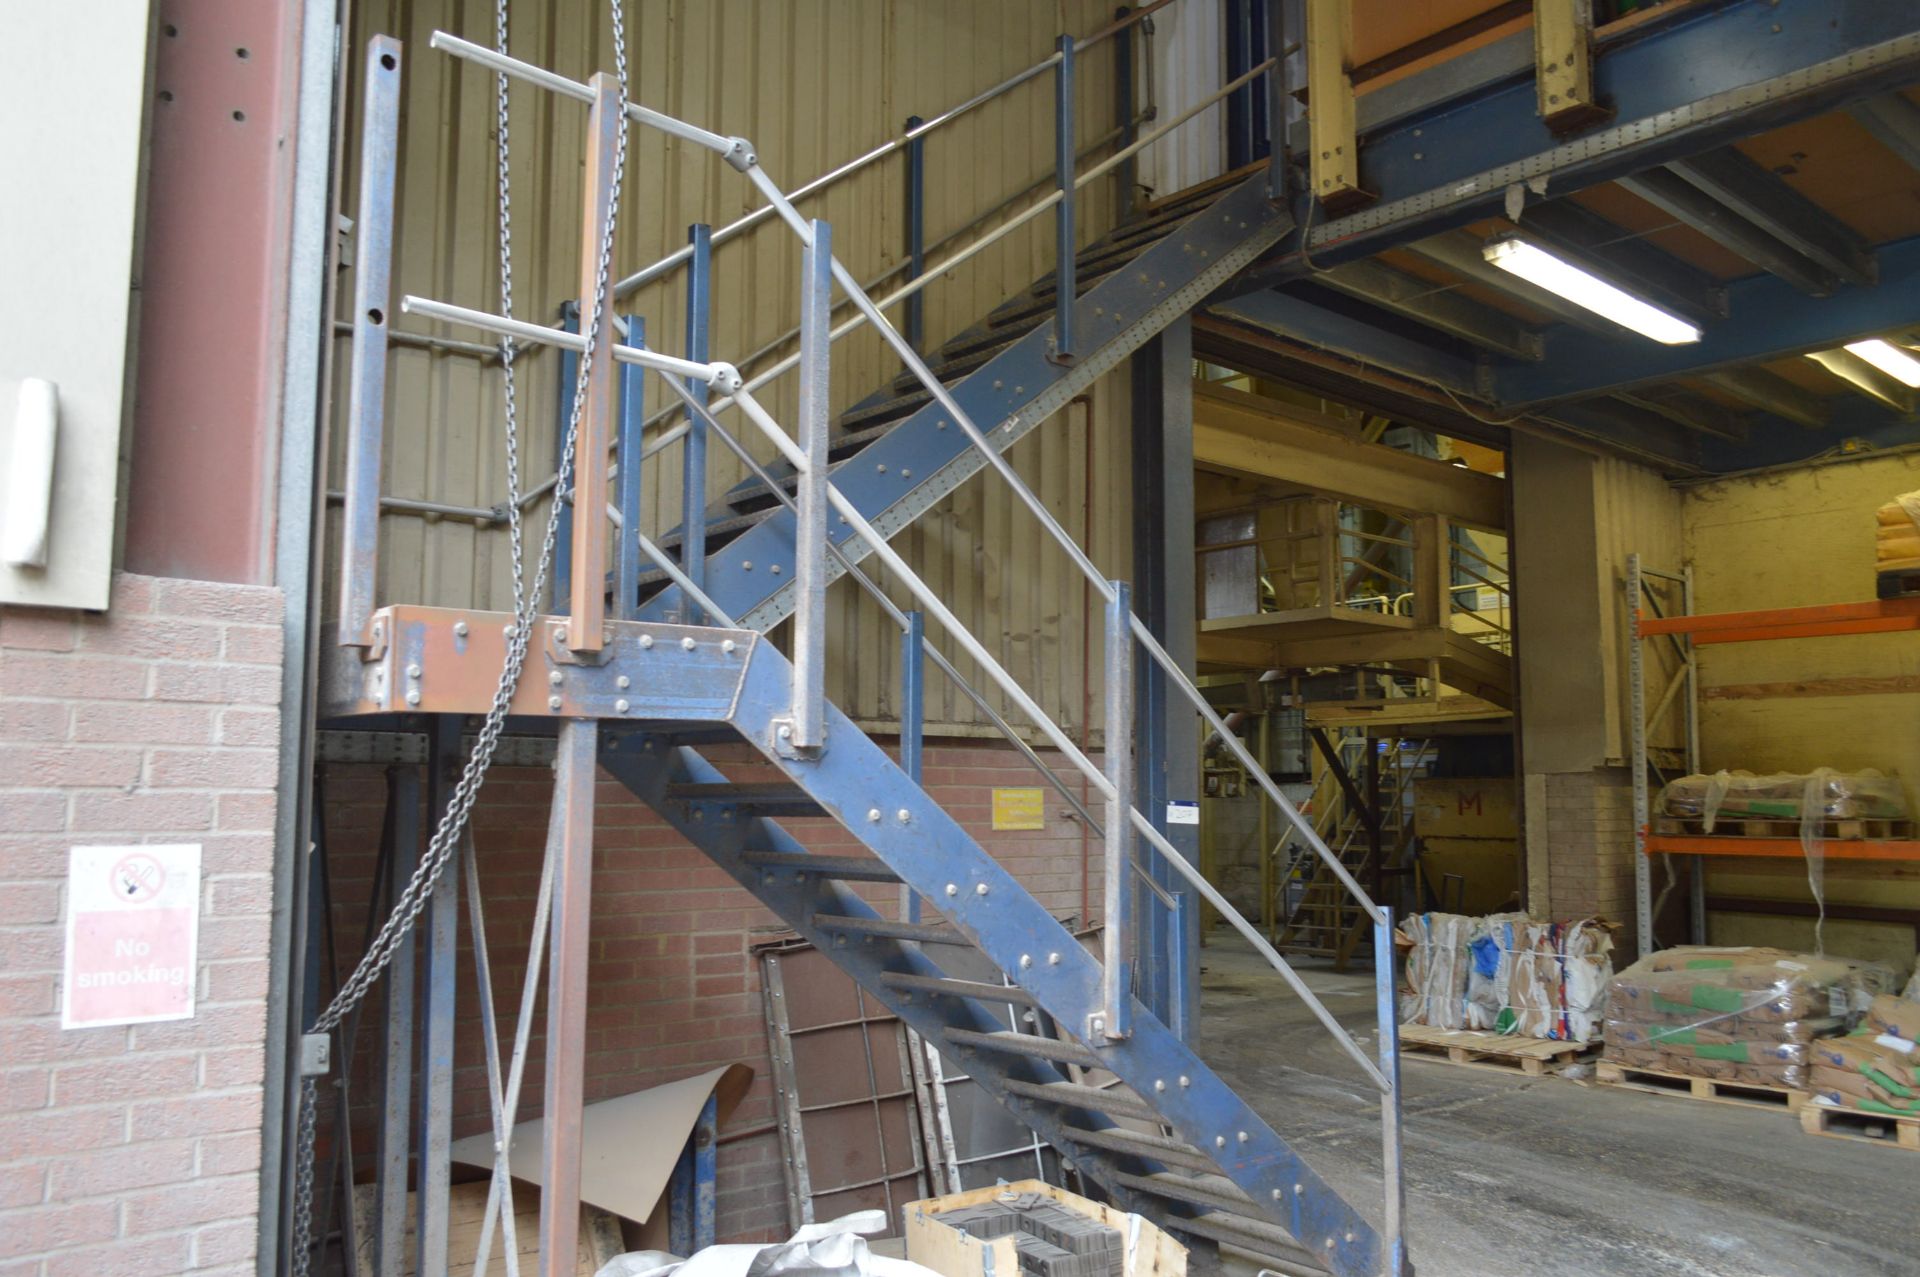 BOLTED SECTIONAL STEEL FRAMED MEZZANINE FLOOR, approx. 18.5m x 6.9m x 4.4m high (to floor), with - Bild 2 aus 5